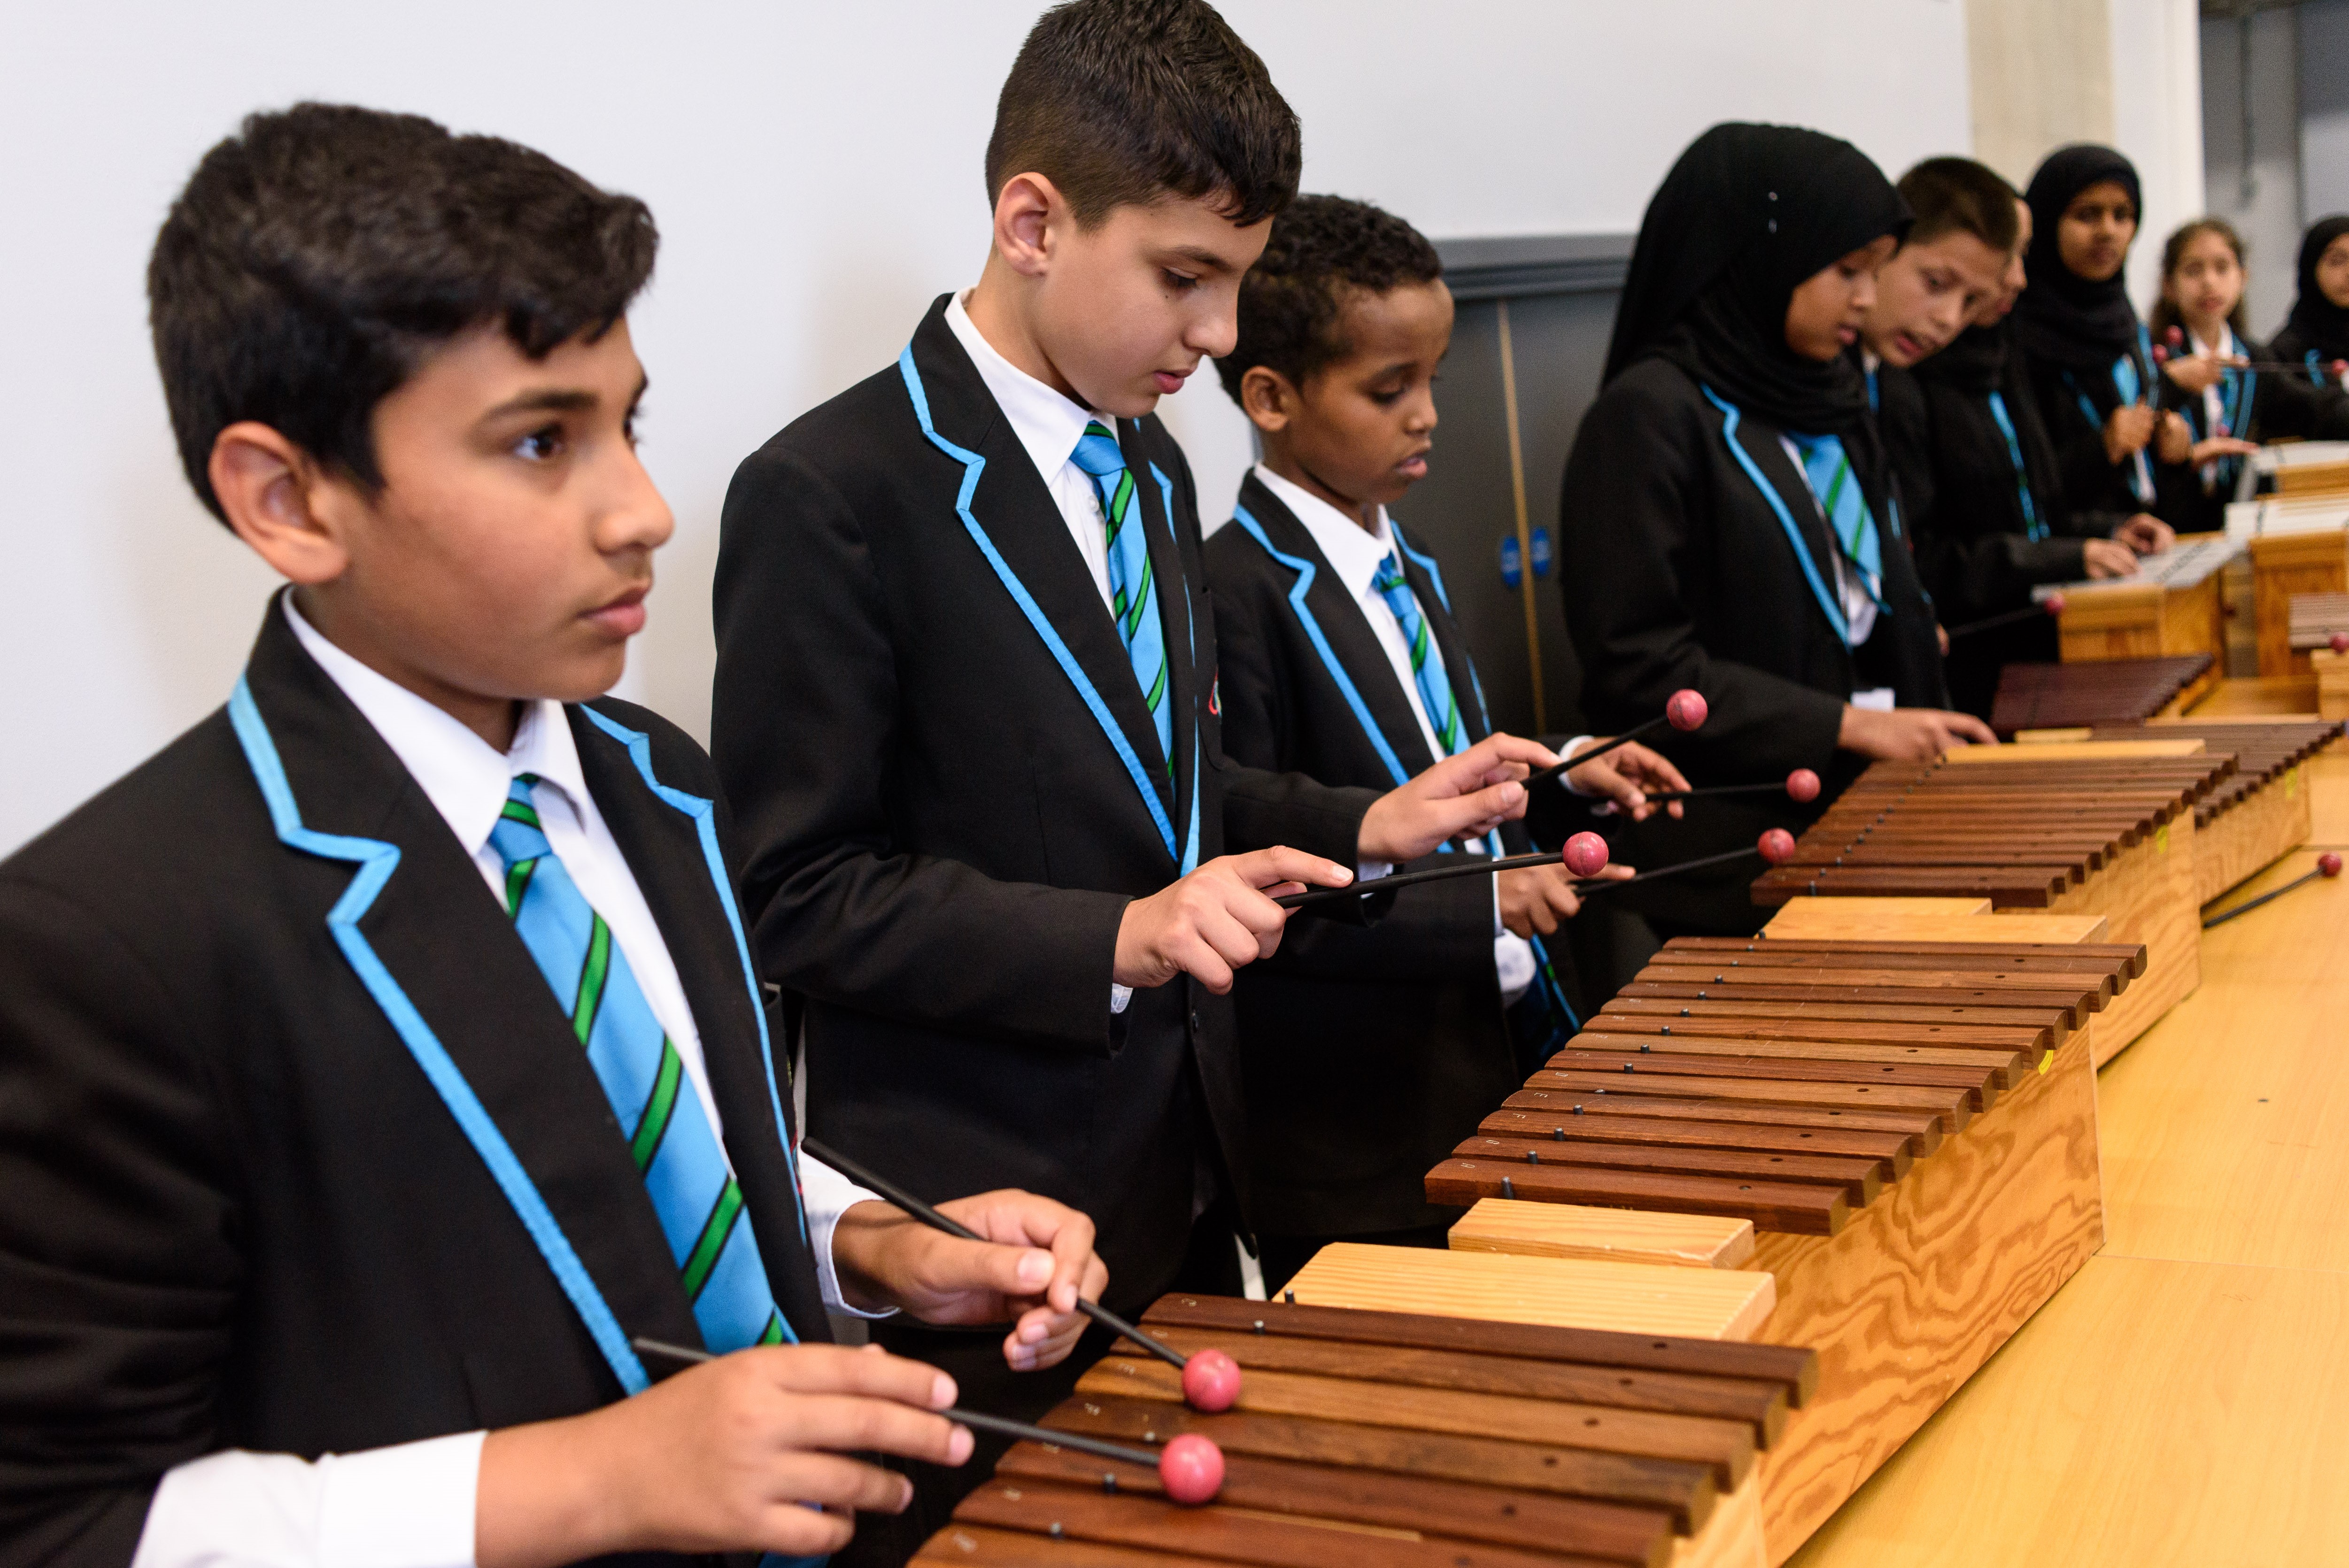 Children experiencing orchestral music